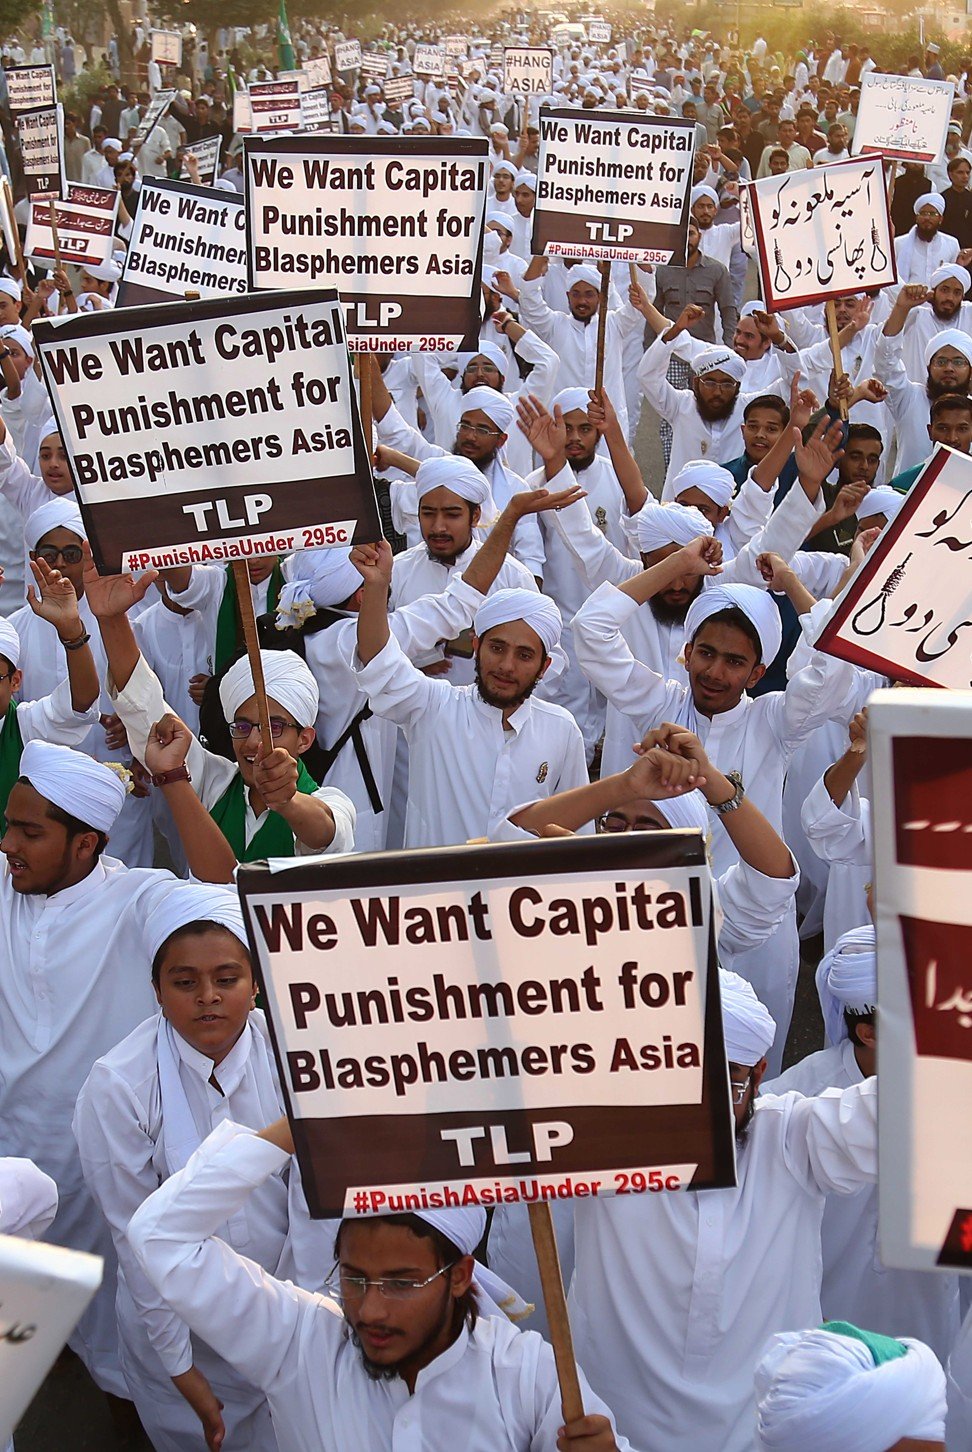 Protesters shout slogans during a protest calling for the execution of Asia Bibi, a Christian accused of blasphemy, during a rally to mark the Prophet Muhammad's birth anniversary, in Karachi, Pakistan, on Wednesday. Photo: EPA